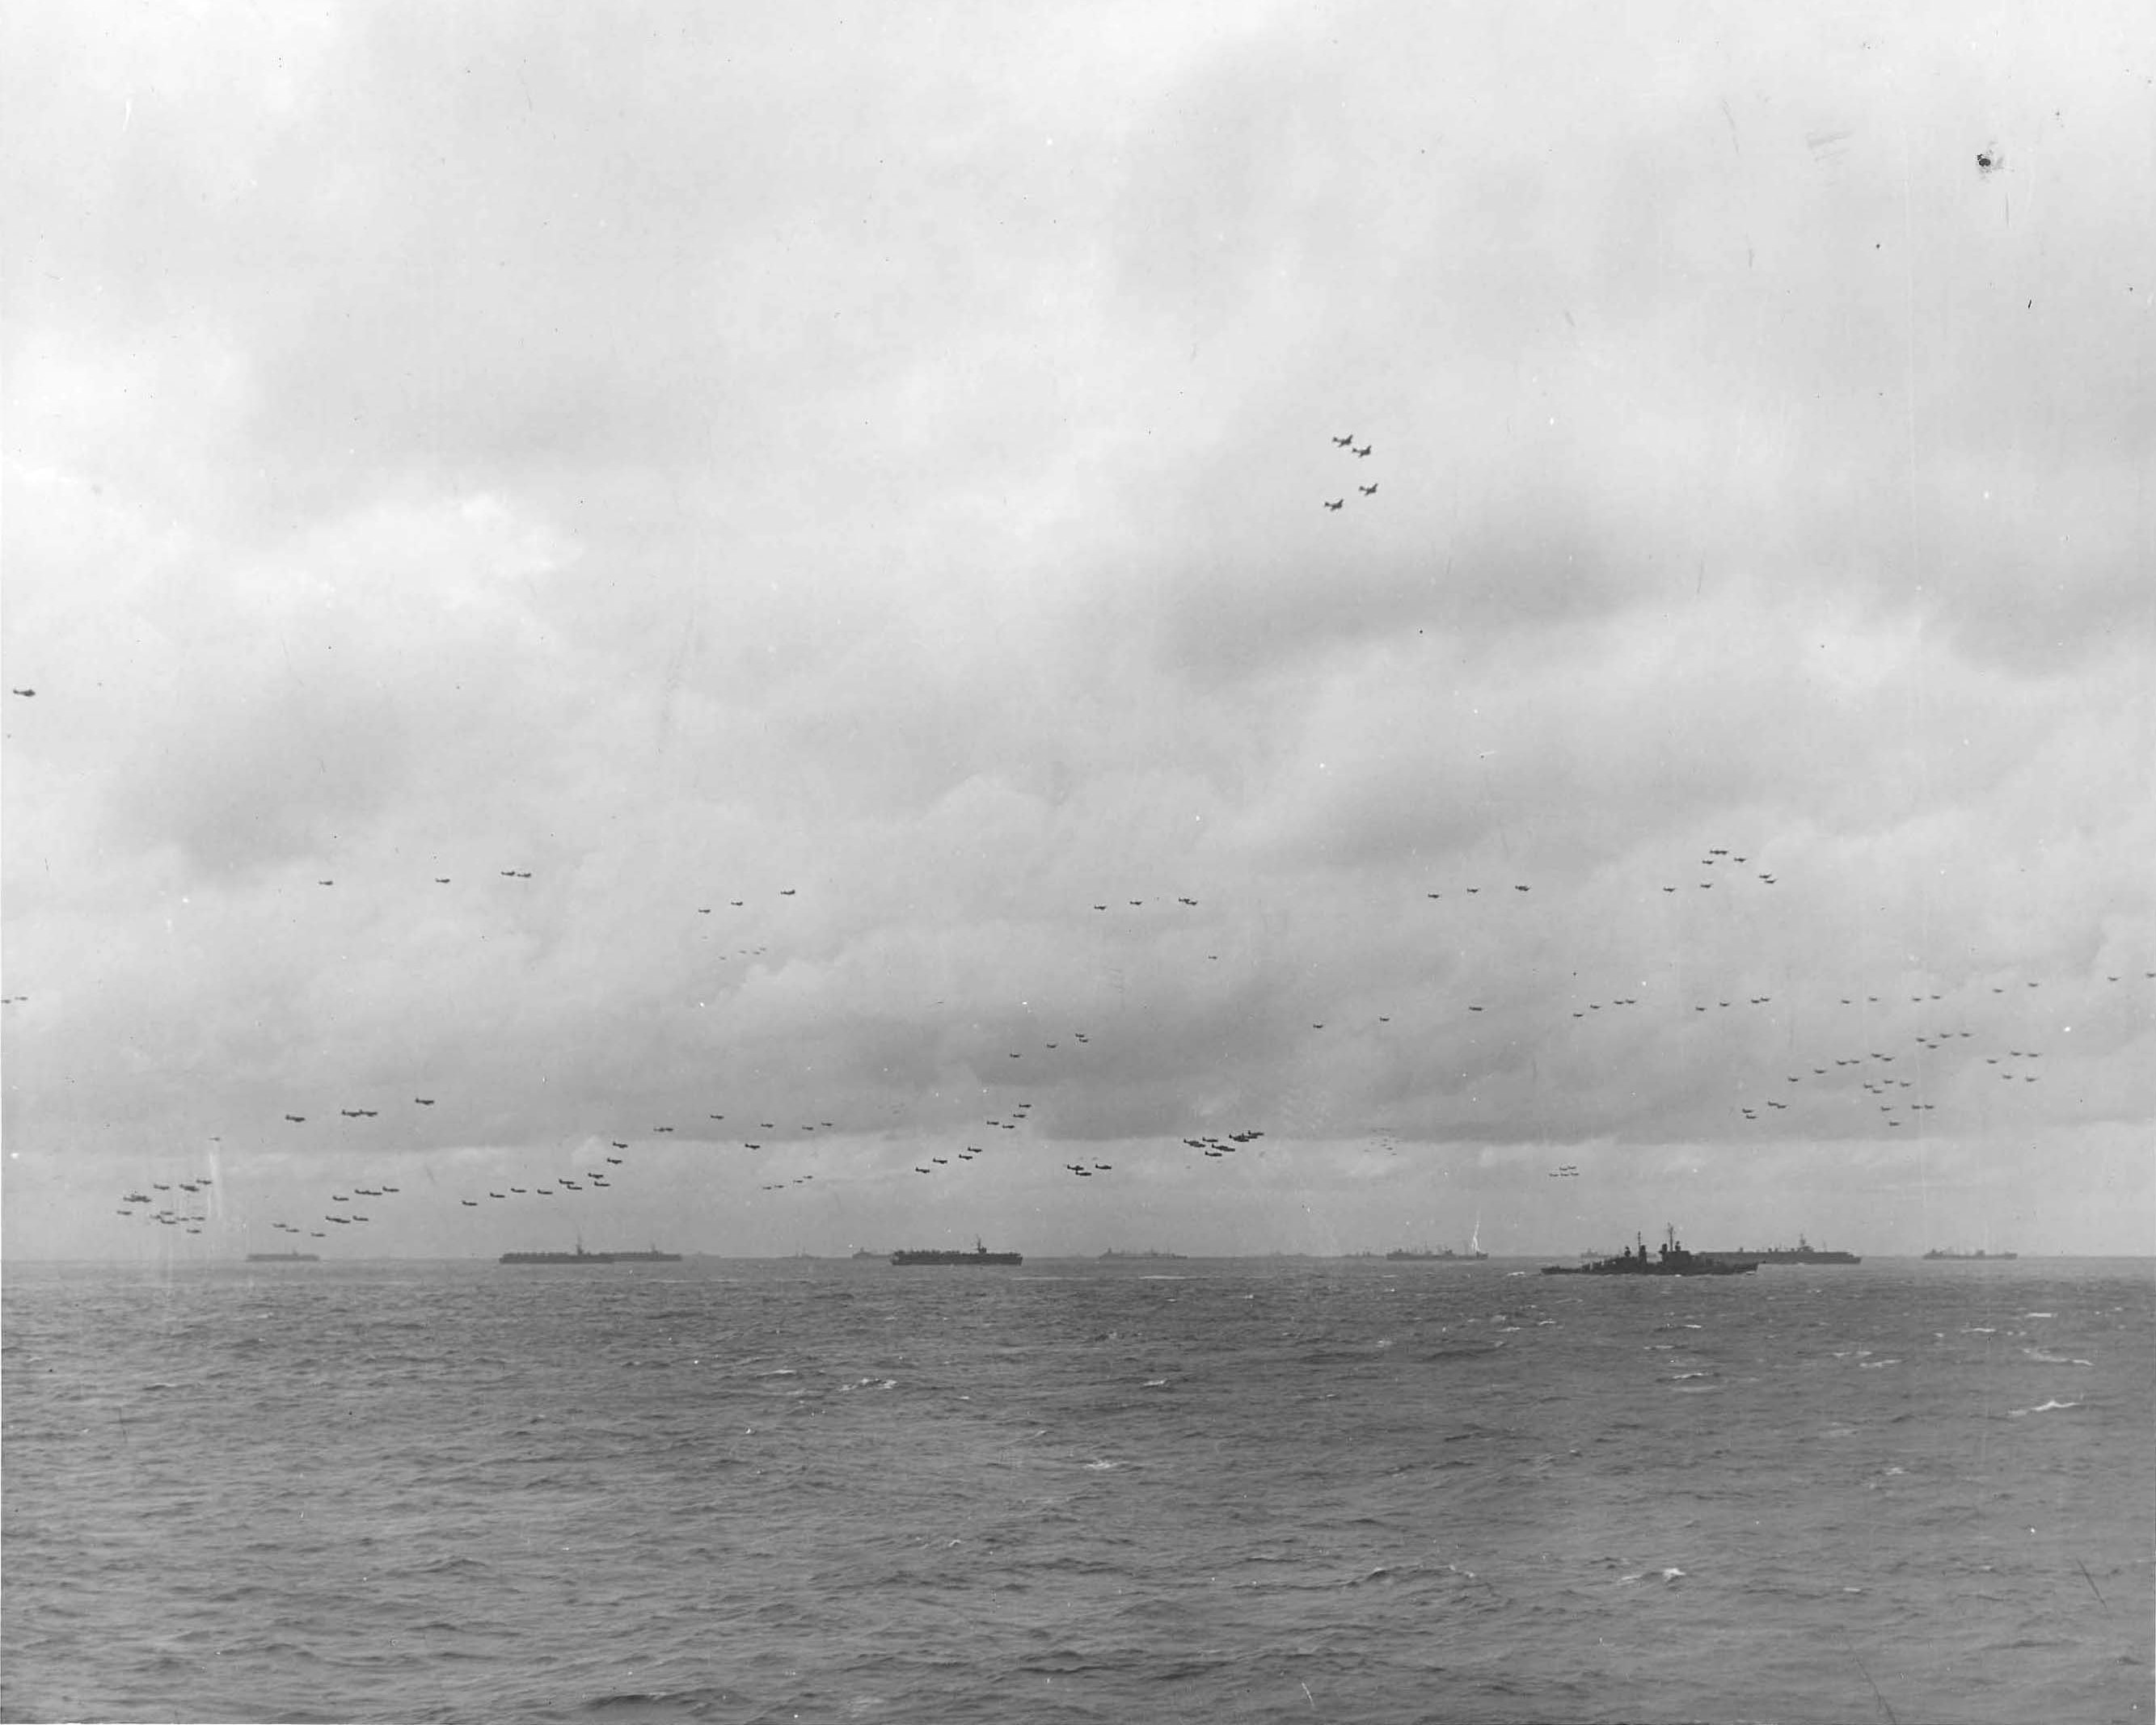 The US Third Fleet steaming in tight formation for a photo opportunity as close to 200 airplanes fly overhead, 22 Aug 1945. Photo taken from USS Wasp (Essex-class). Note five Light Carriers.